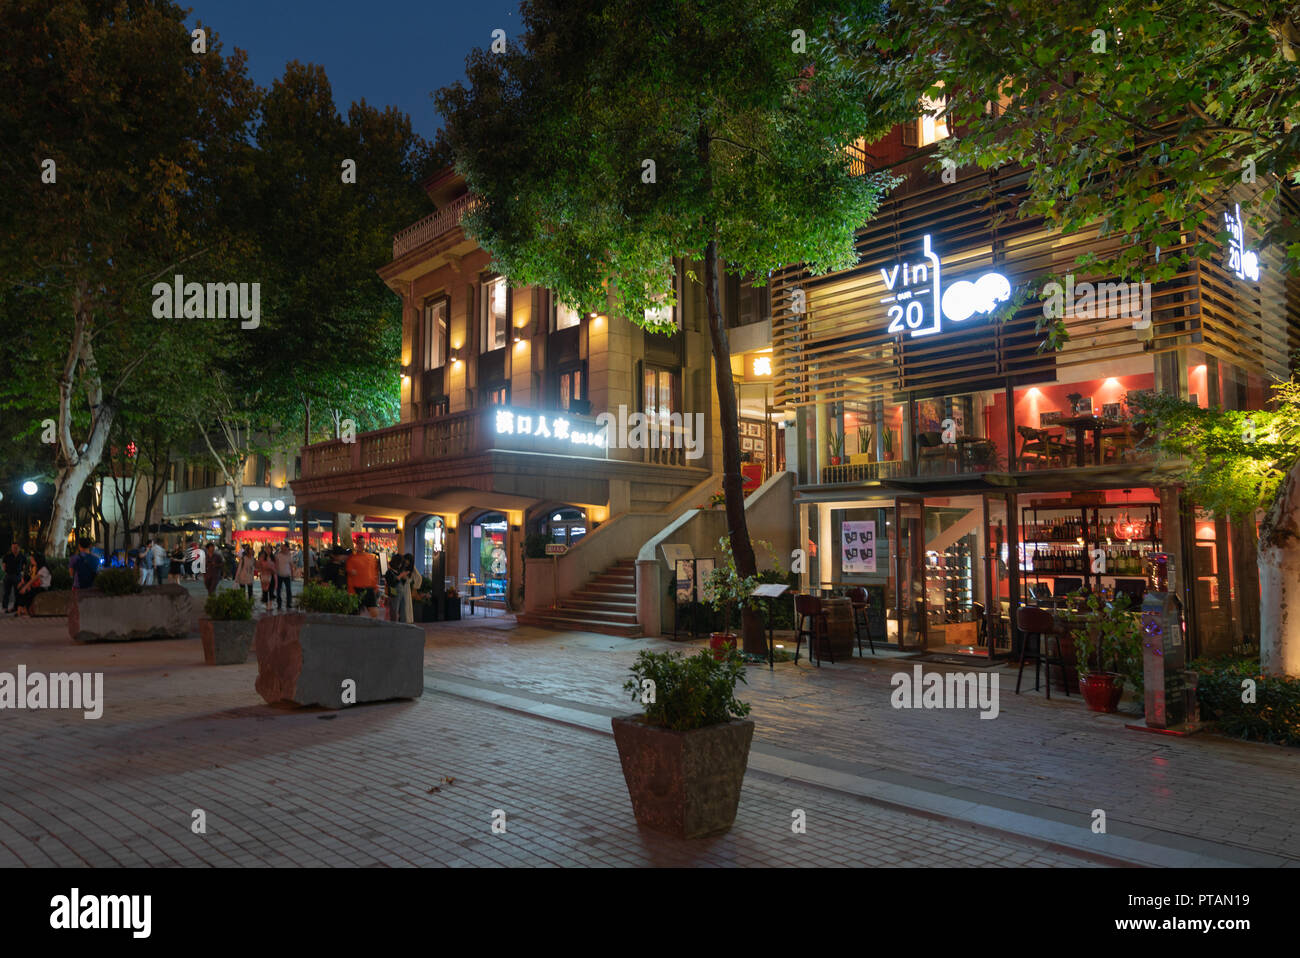 4 October 2018, Wuhan China : Wuhan tiandi restaurants and shopping district street view at night with exterior of a wine bar in Hubei China Stock Photo